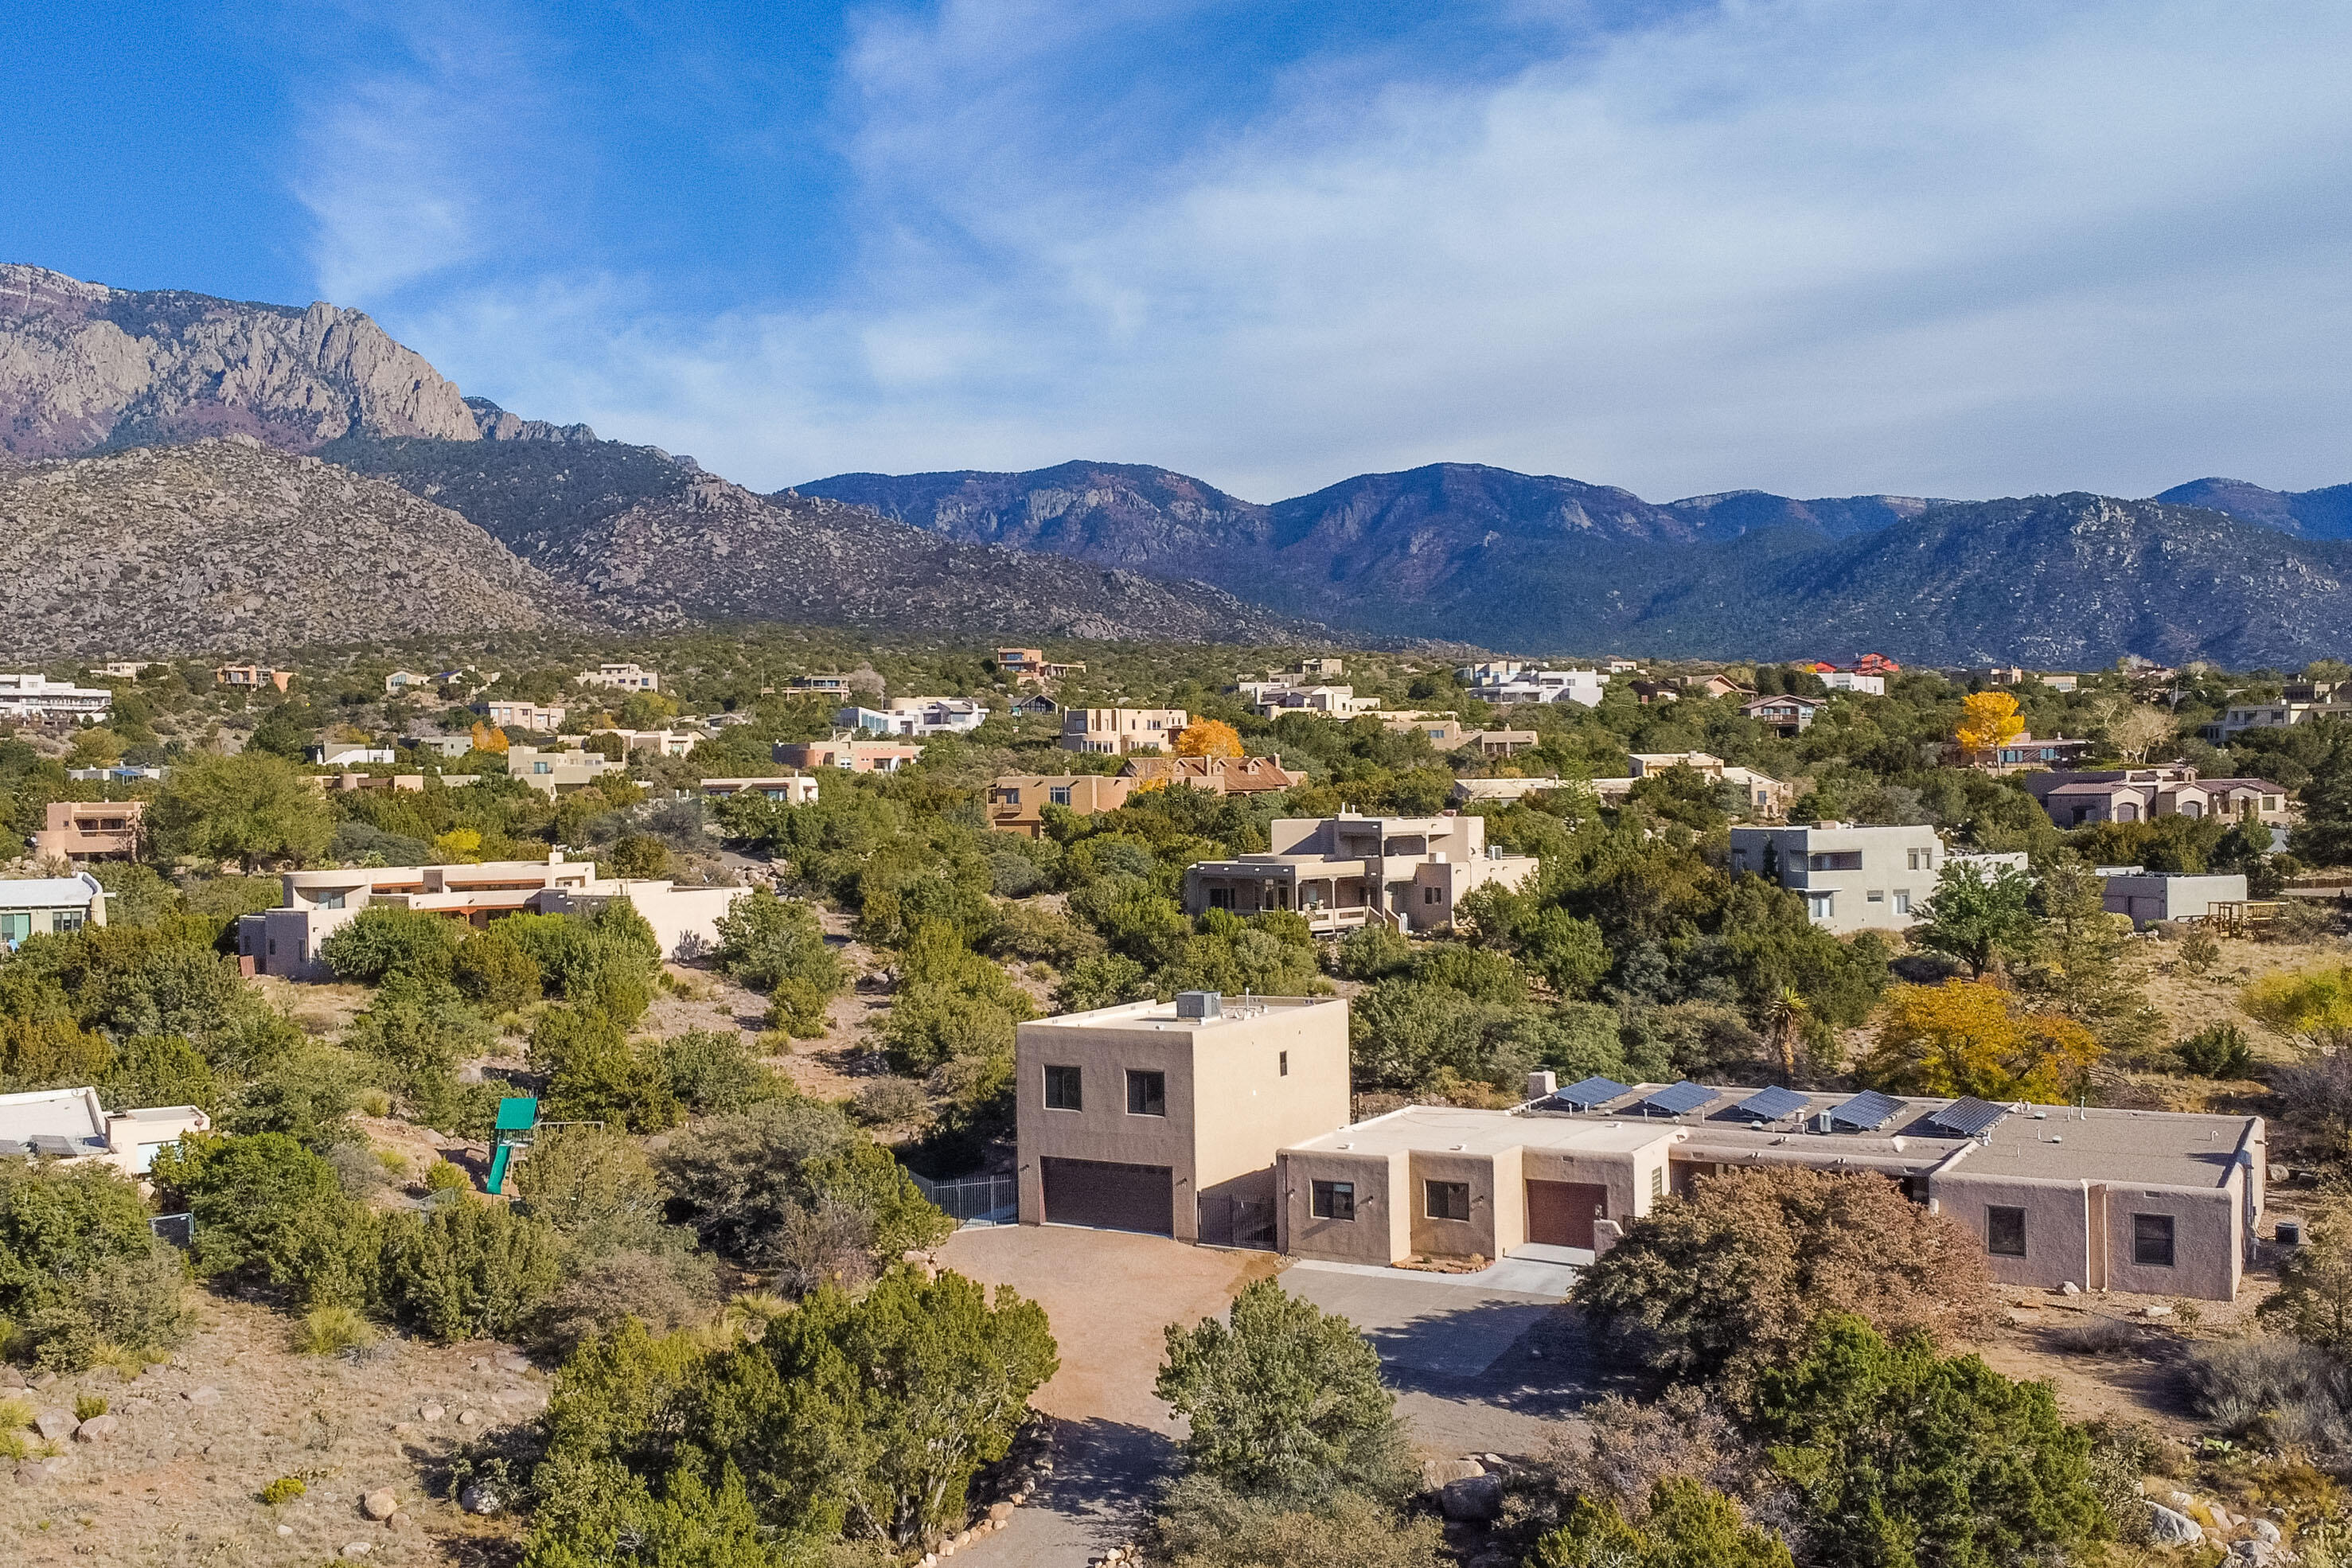 Open House: Sunday 4/28 (1-3 pm). Extensively updated home in Sandia Heights on large 1.2 acre lot. One story home with 4 bedrooms, 2 1/2 baths & attached 3 car garage with built-in 28-drawer workbench. Brand new heated 2-car garage with area for workshop & amazing upper-level artist studio with stunning views. Inviting courtyard entry with custom metal gate. Updated kitchen with custom wood cabinets, granite countertops, stainless steel appliances, & water softening system (includes a reverse osmosis sys). Unique glass doors to the pantry & laundry room. Washer/dryer combo unit. Unique mosaic tile design in dining room & living room. Recently refinished Red Oak hardwood floors throughout. Private backyard with large, covered patio, fruit trees & raised vegetable planter.